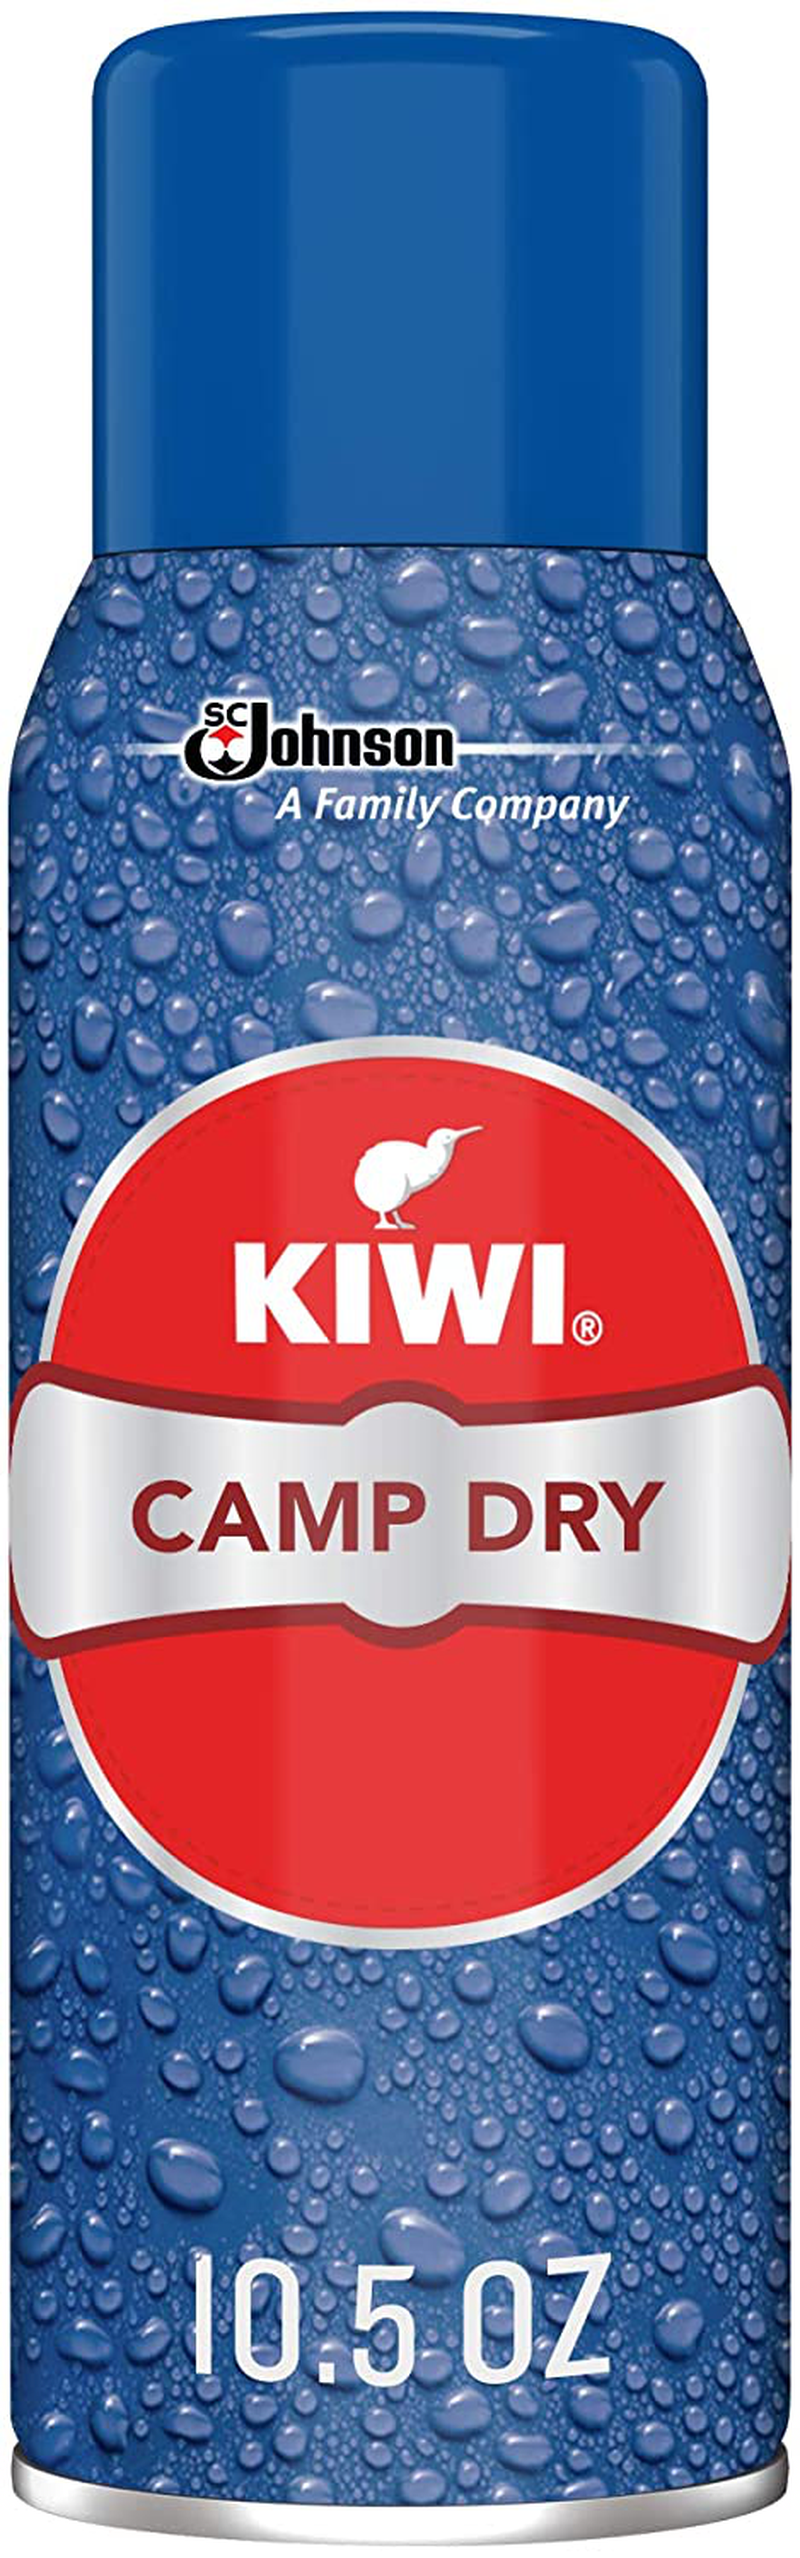 KIWI Camp Dry Performance Fabric Protector Spray - Restores Water Repellent and Provides Fabric Protection (1 Aerosol), 10.5 Oz